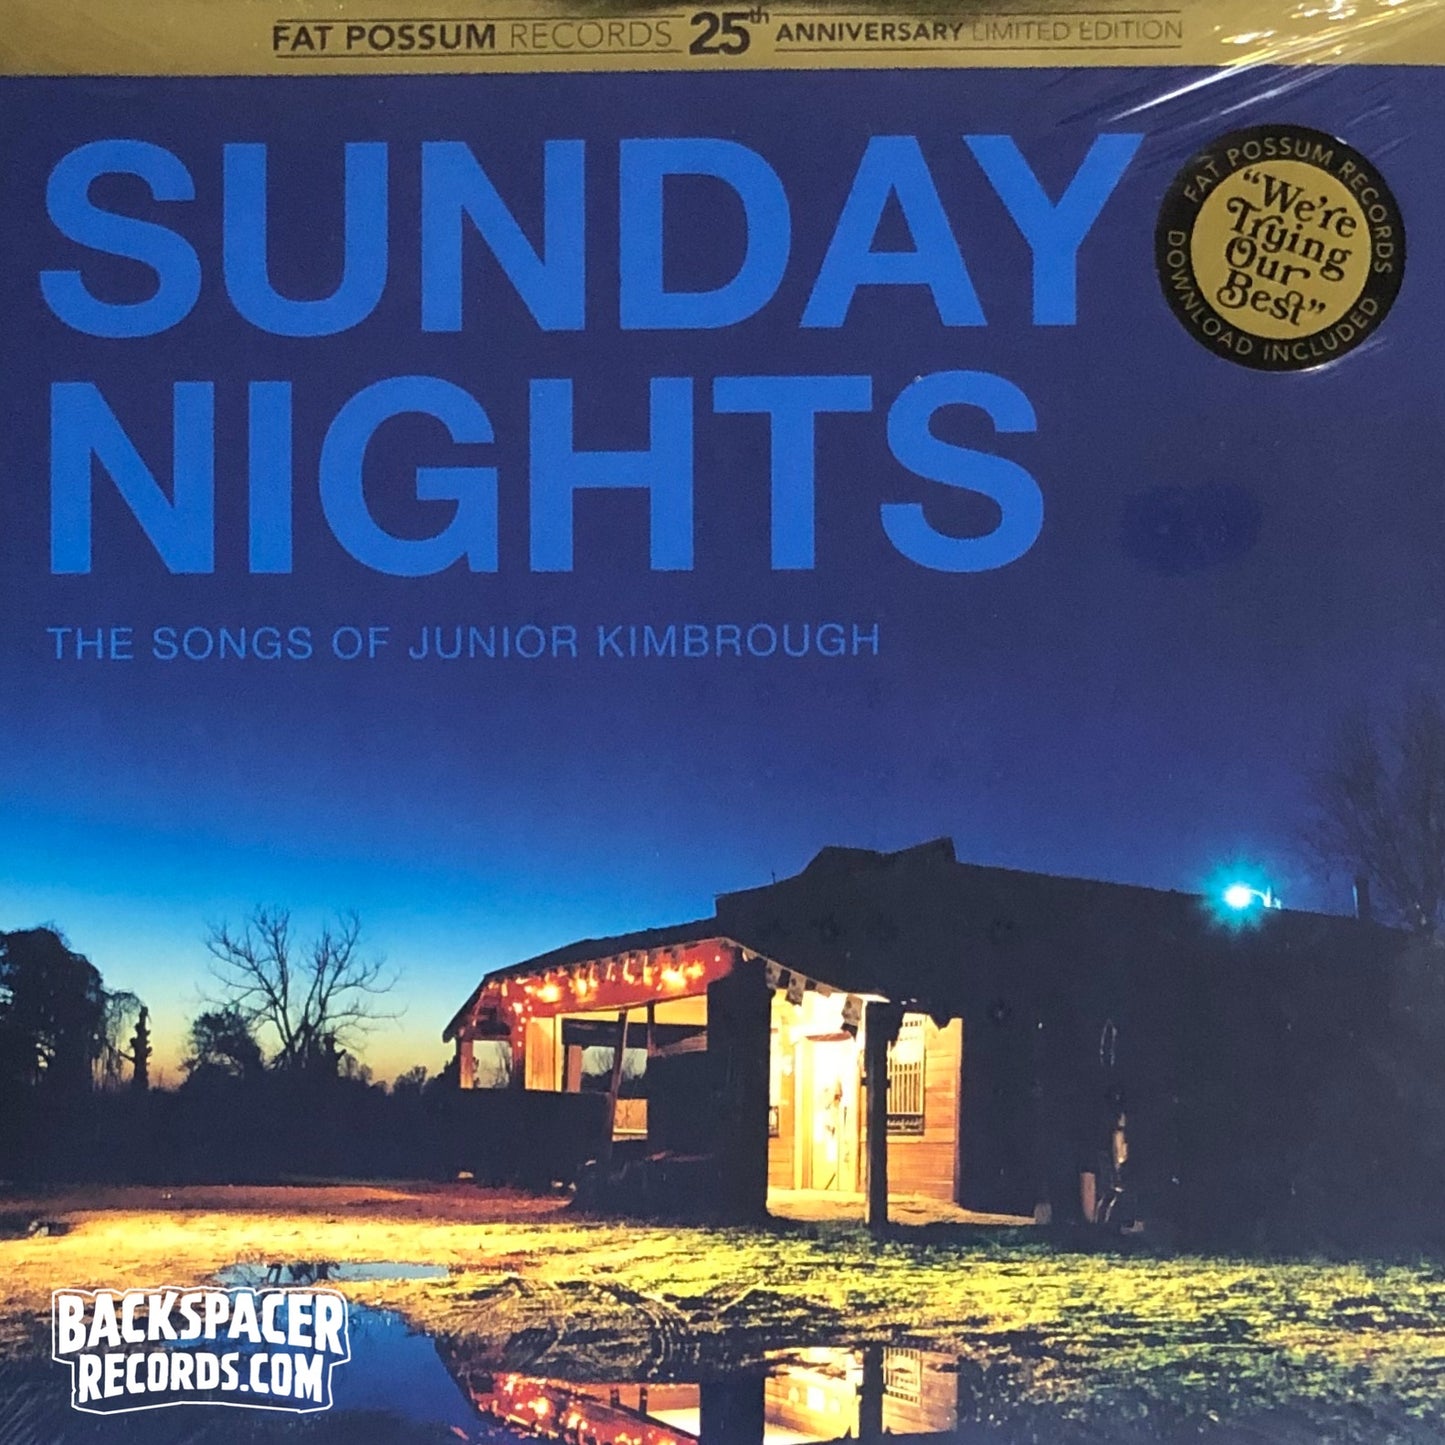 Sunday Nights: The Songs Of Junior Kimbrough - Various Artists (Limited Edition) 2-LP (Sealed)